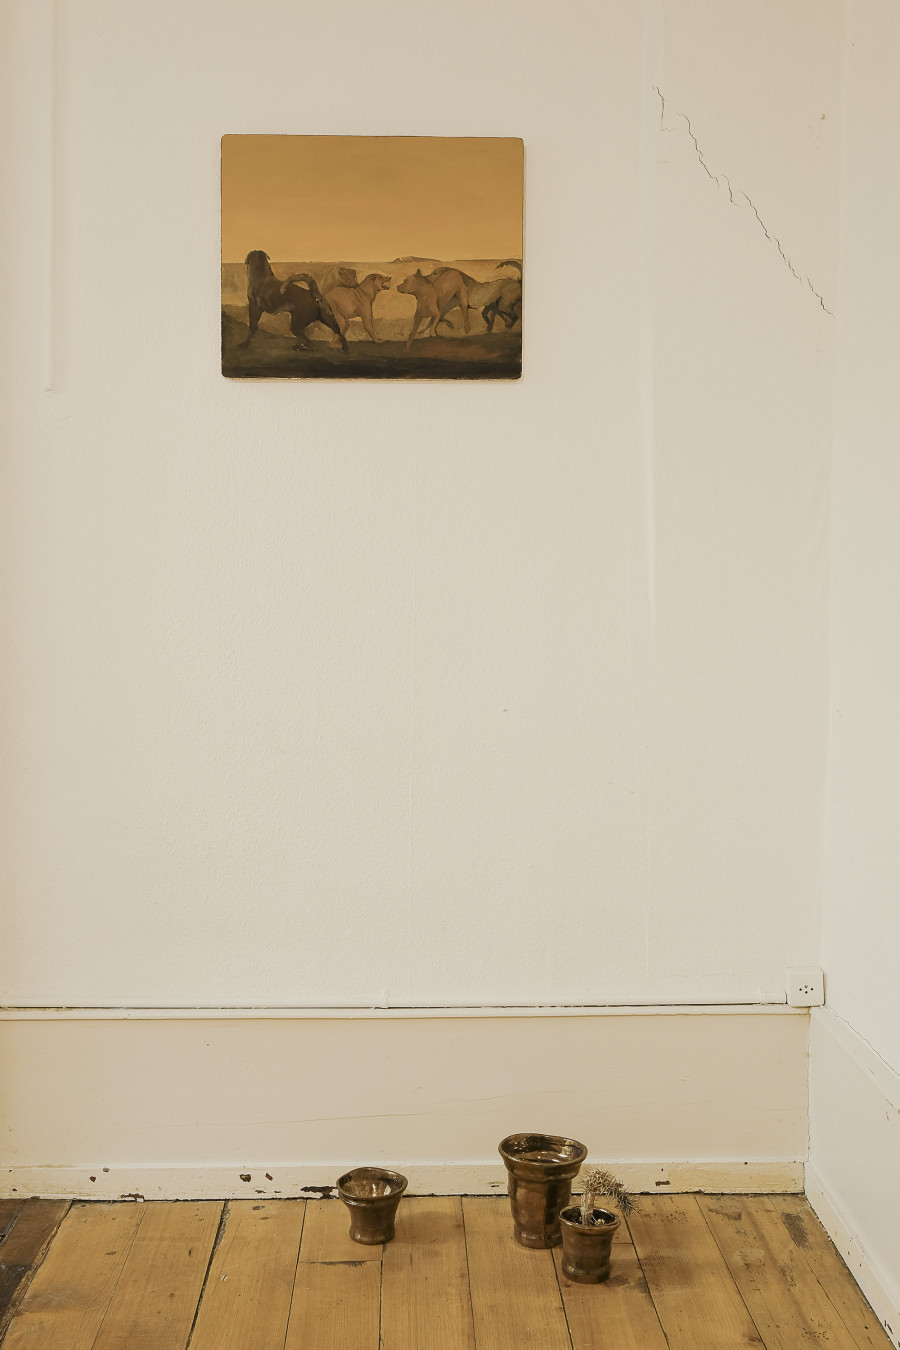 On the wall: Robert Brambora, Untitled, 2020, oil on wood, copper, 40 x 50 cm / On the floor: Untitled, 2020, ceramic, copper glaze, various dimensions. Photography: Sebastian Verdon/ all images copyright and courtesy of the artists, CAN Centre d’art Neuchâtel, Sans titre (2016).